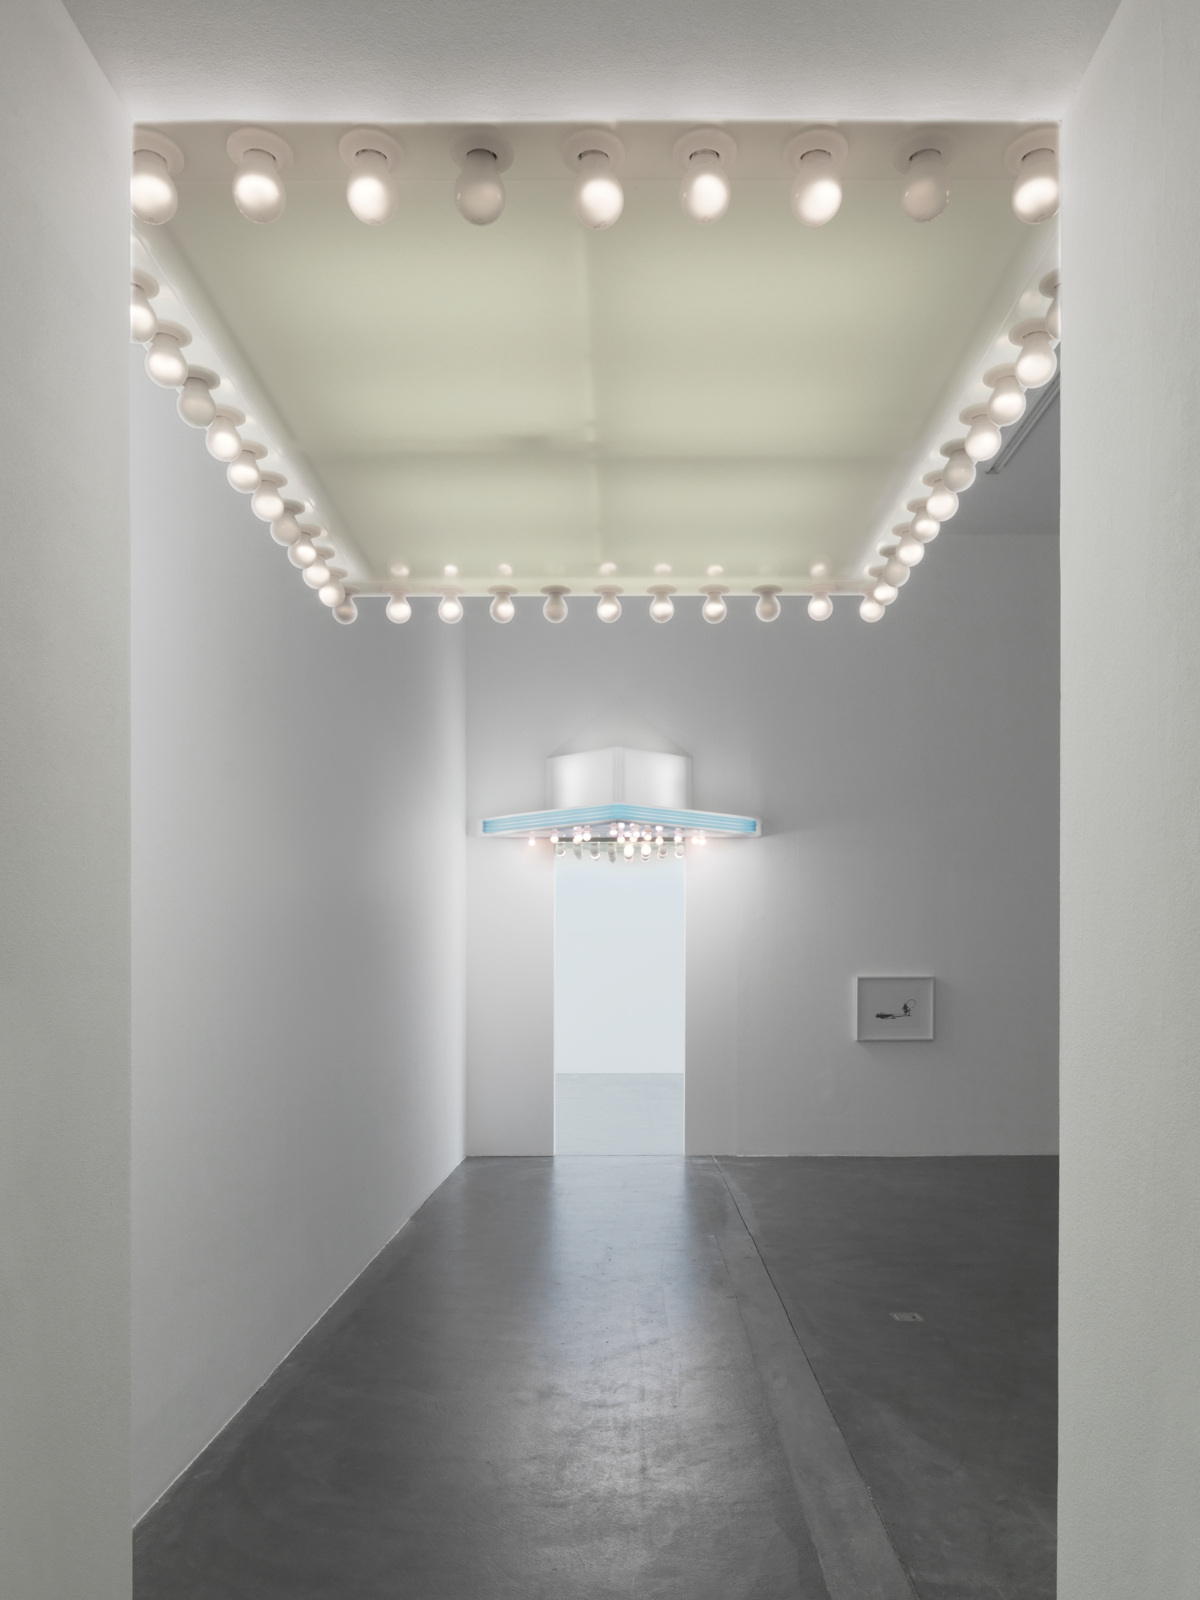 Philippe Parreno / "May", exhibition view, Kunsthalle Zürich / 2009